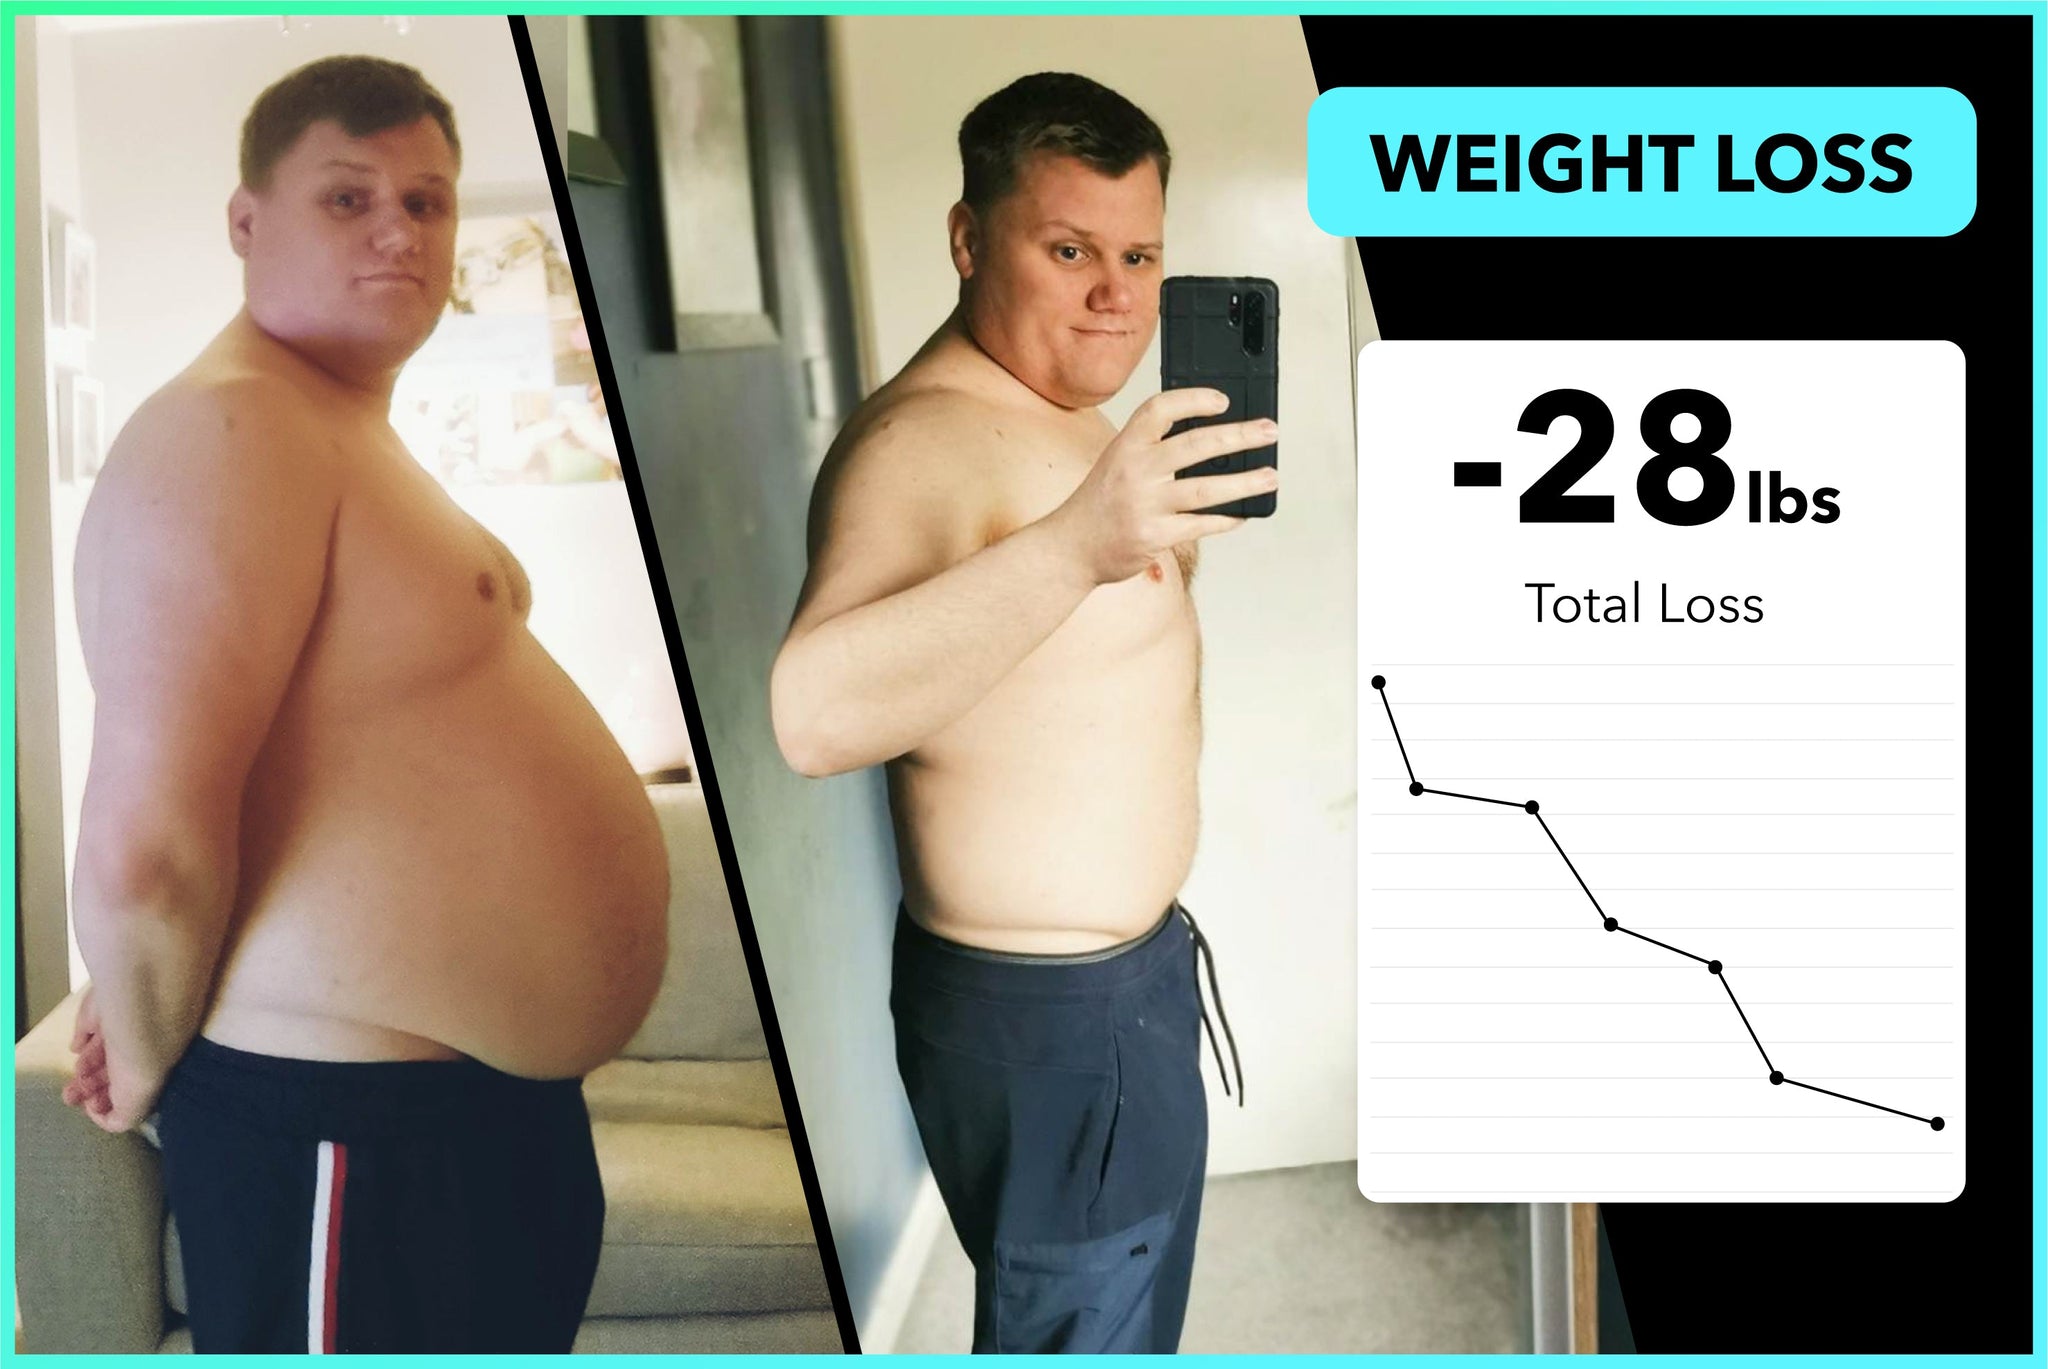 Find out how Shane lost 28lbs in 3 months with Team RH